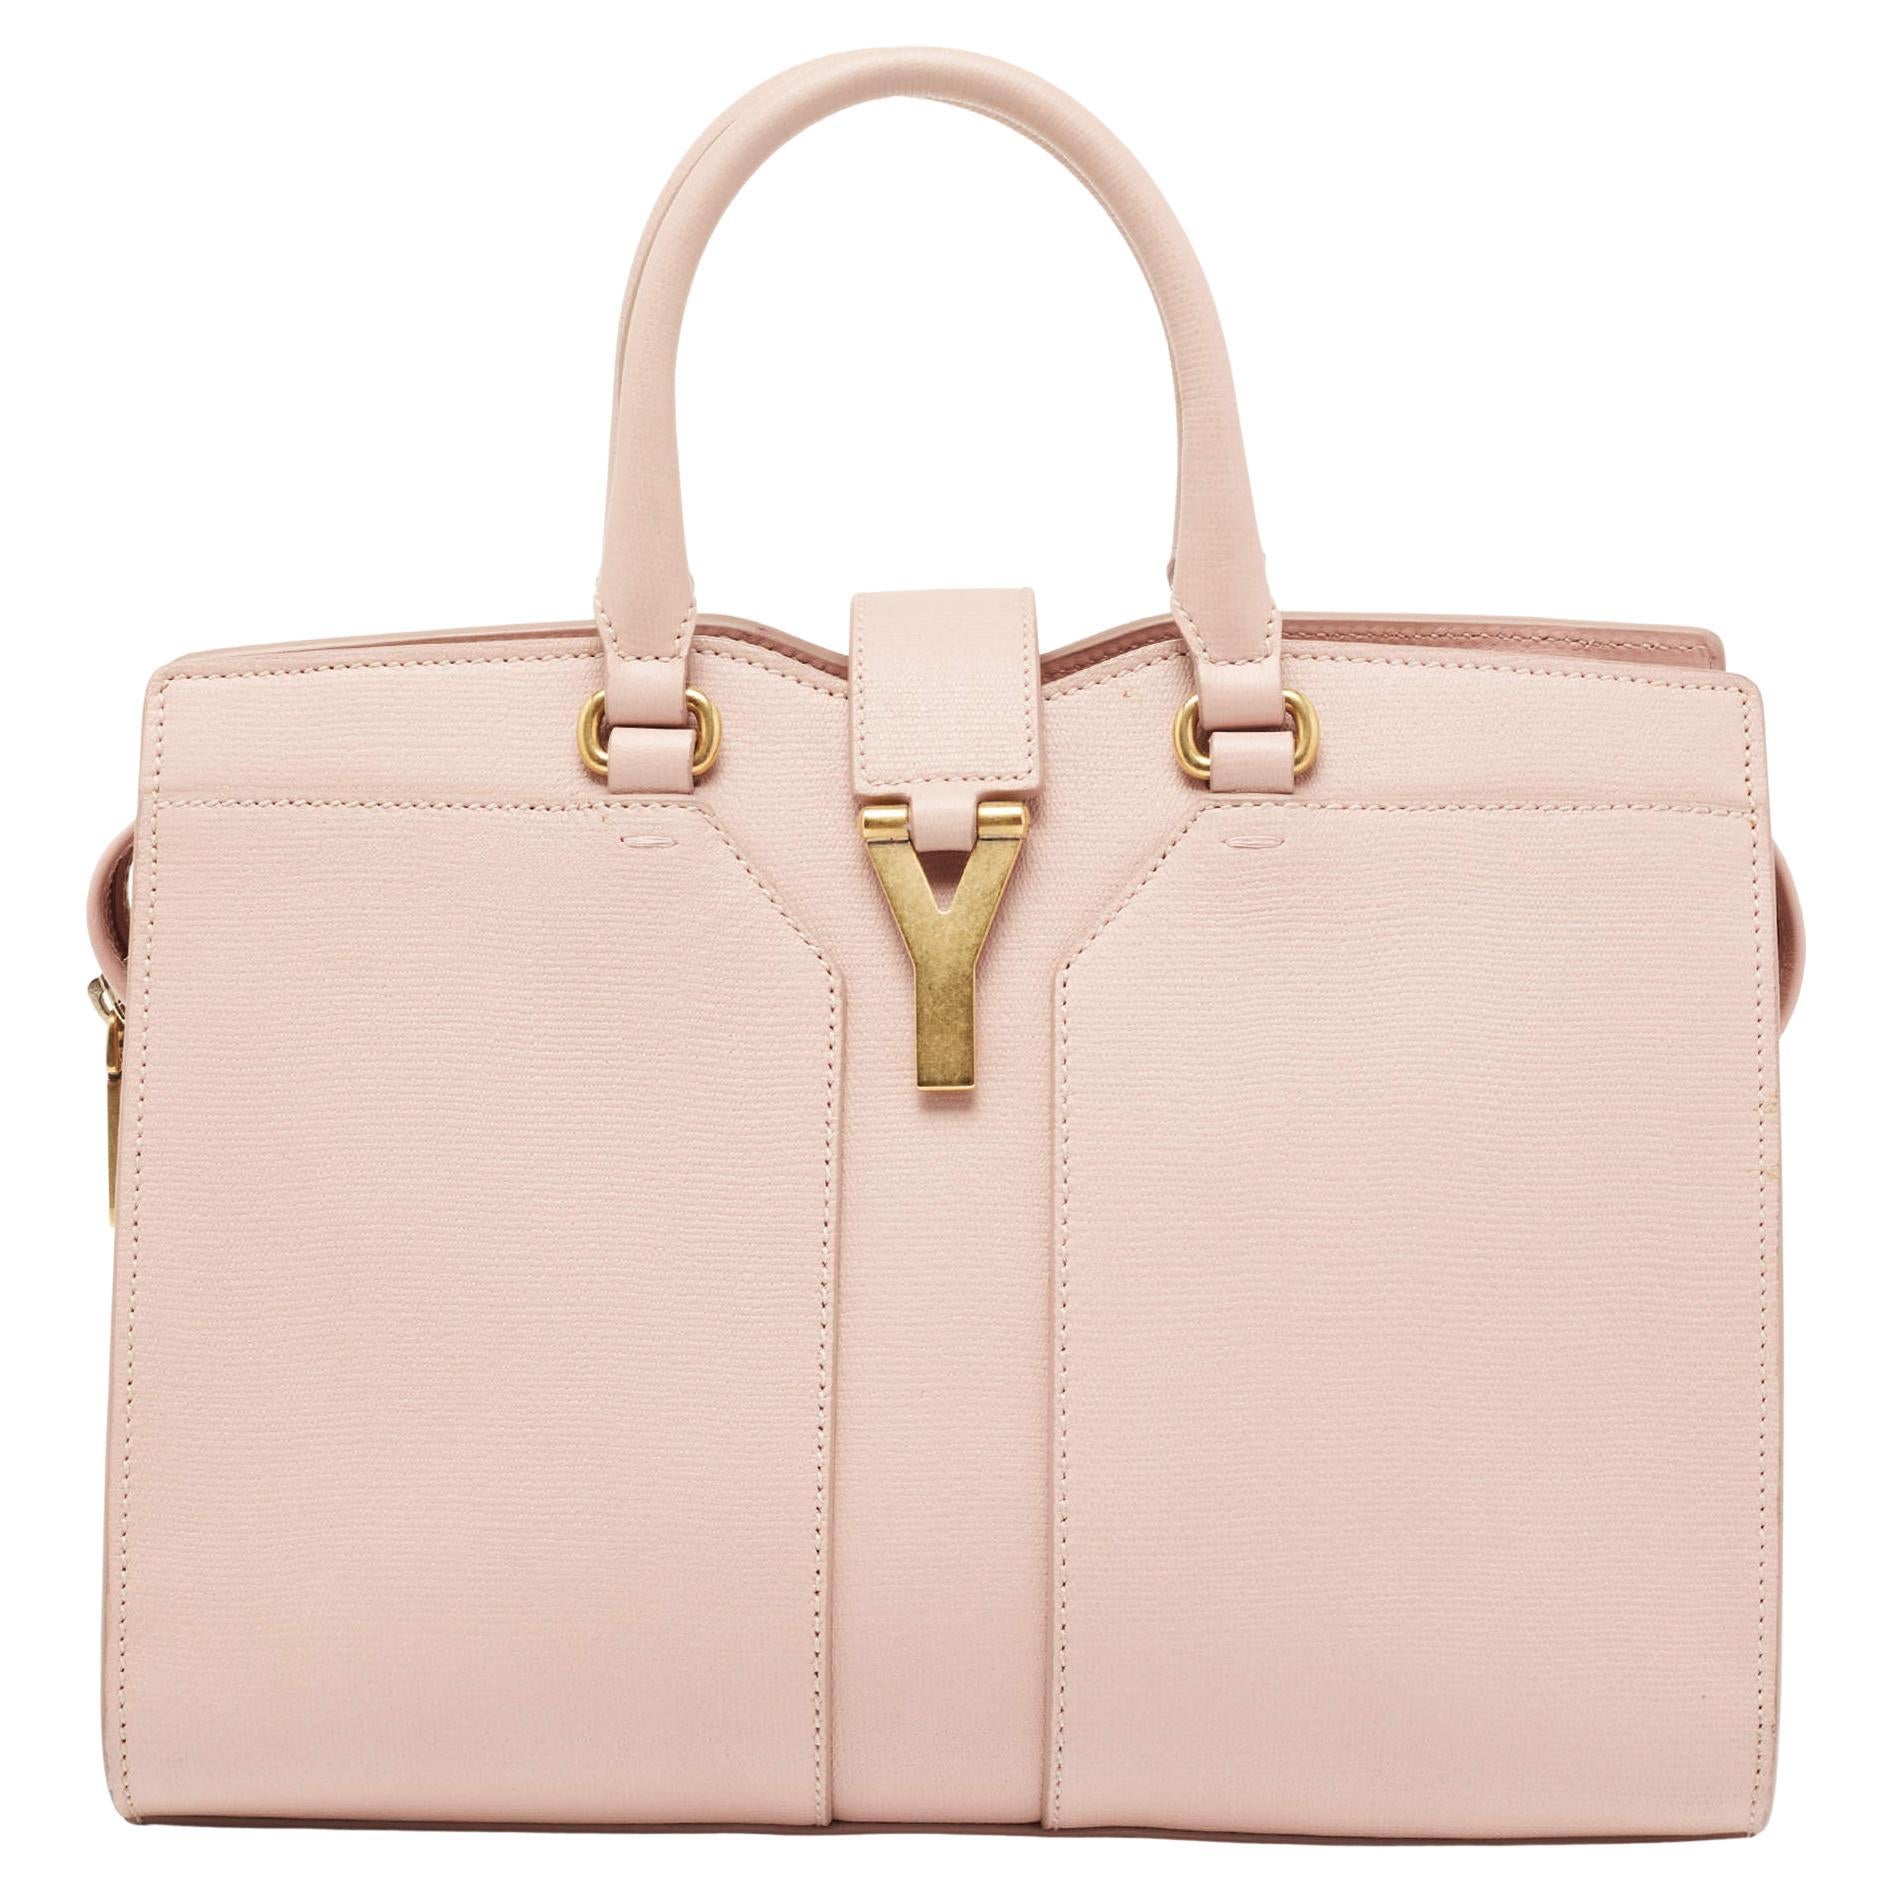 Yves Saint Laurent Light Pink Leather Small Y-Ligne Cabas Tote